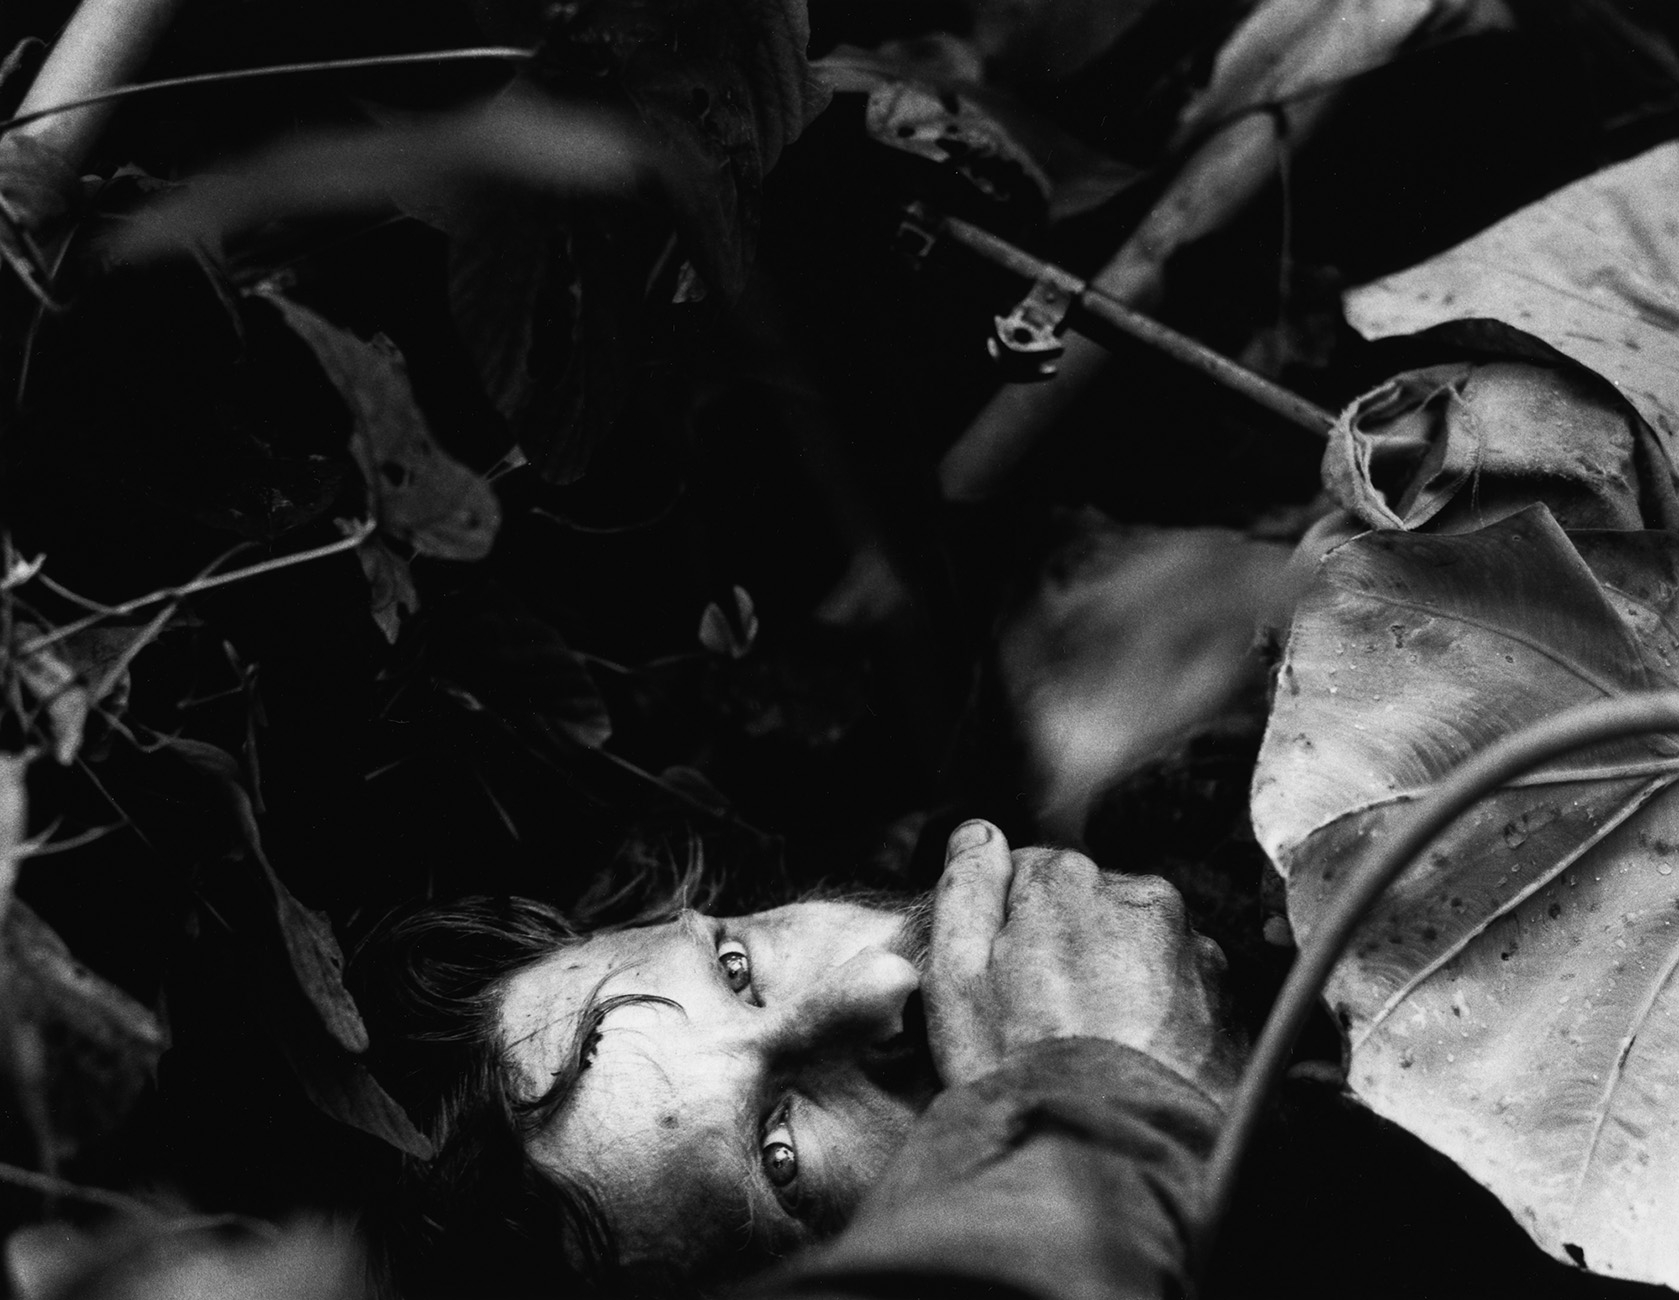 Black and white photo: Between jungle plants the face of a man. His mouth is held shut with one hand.